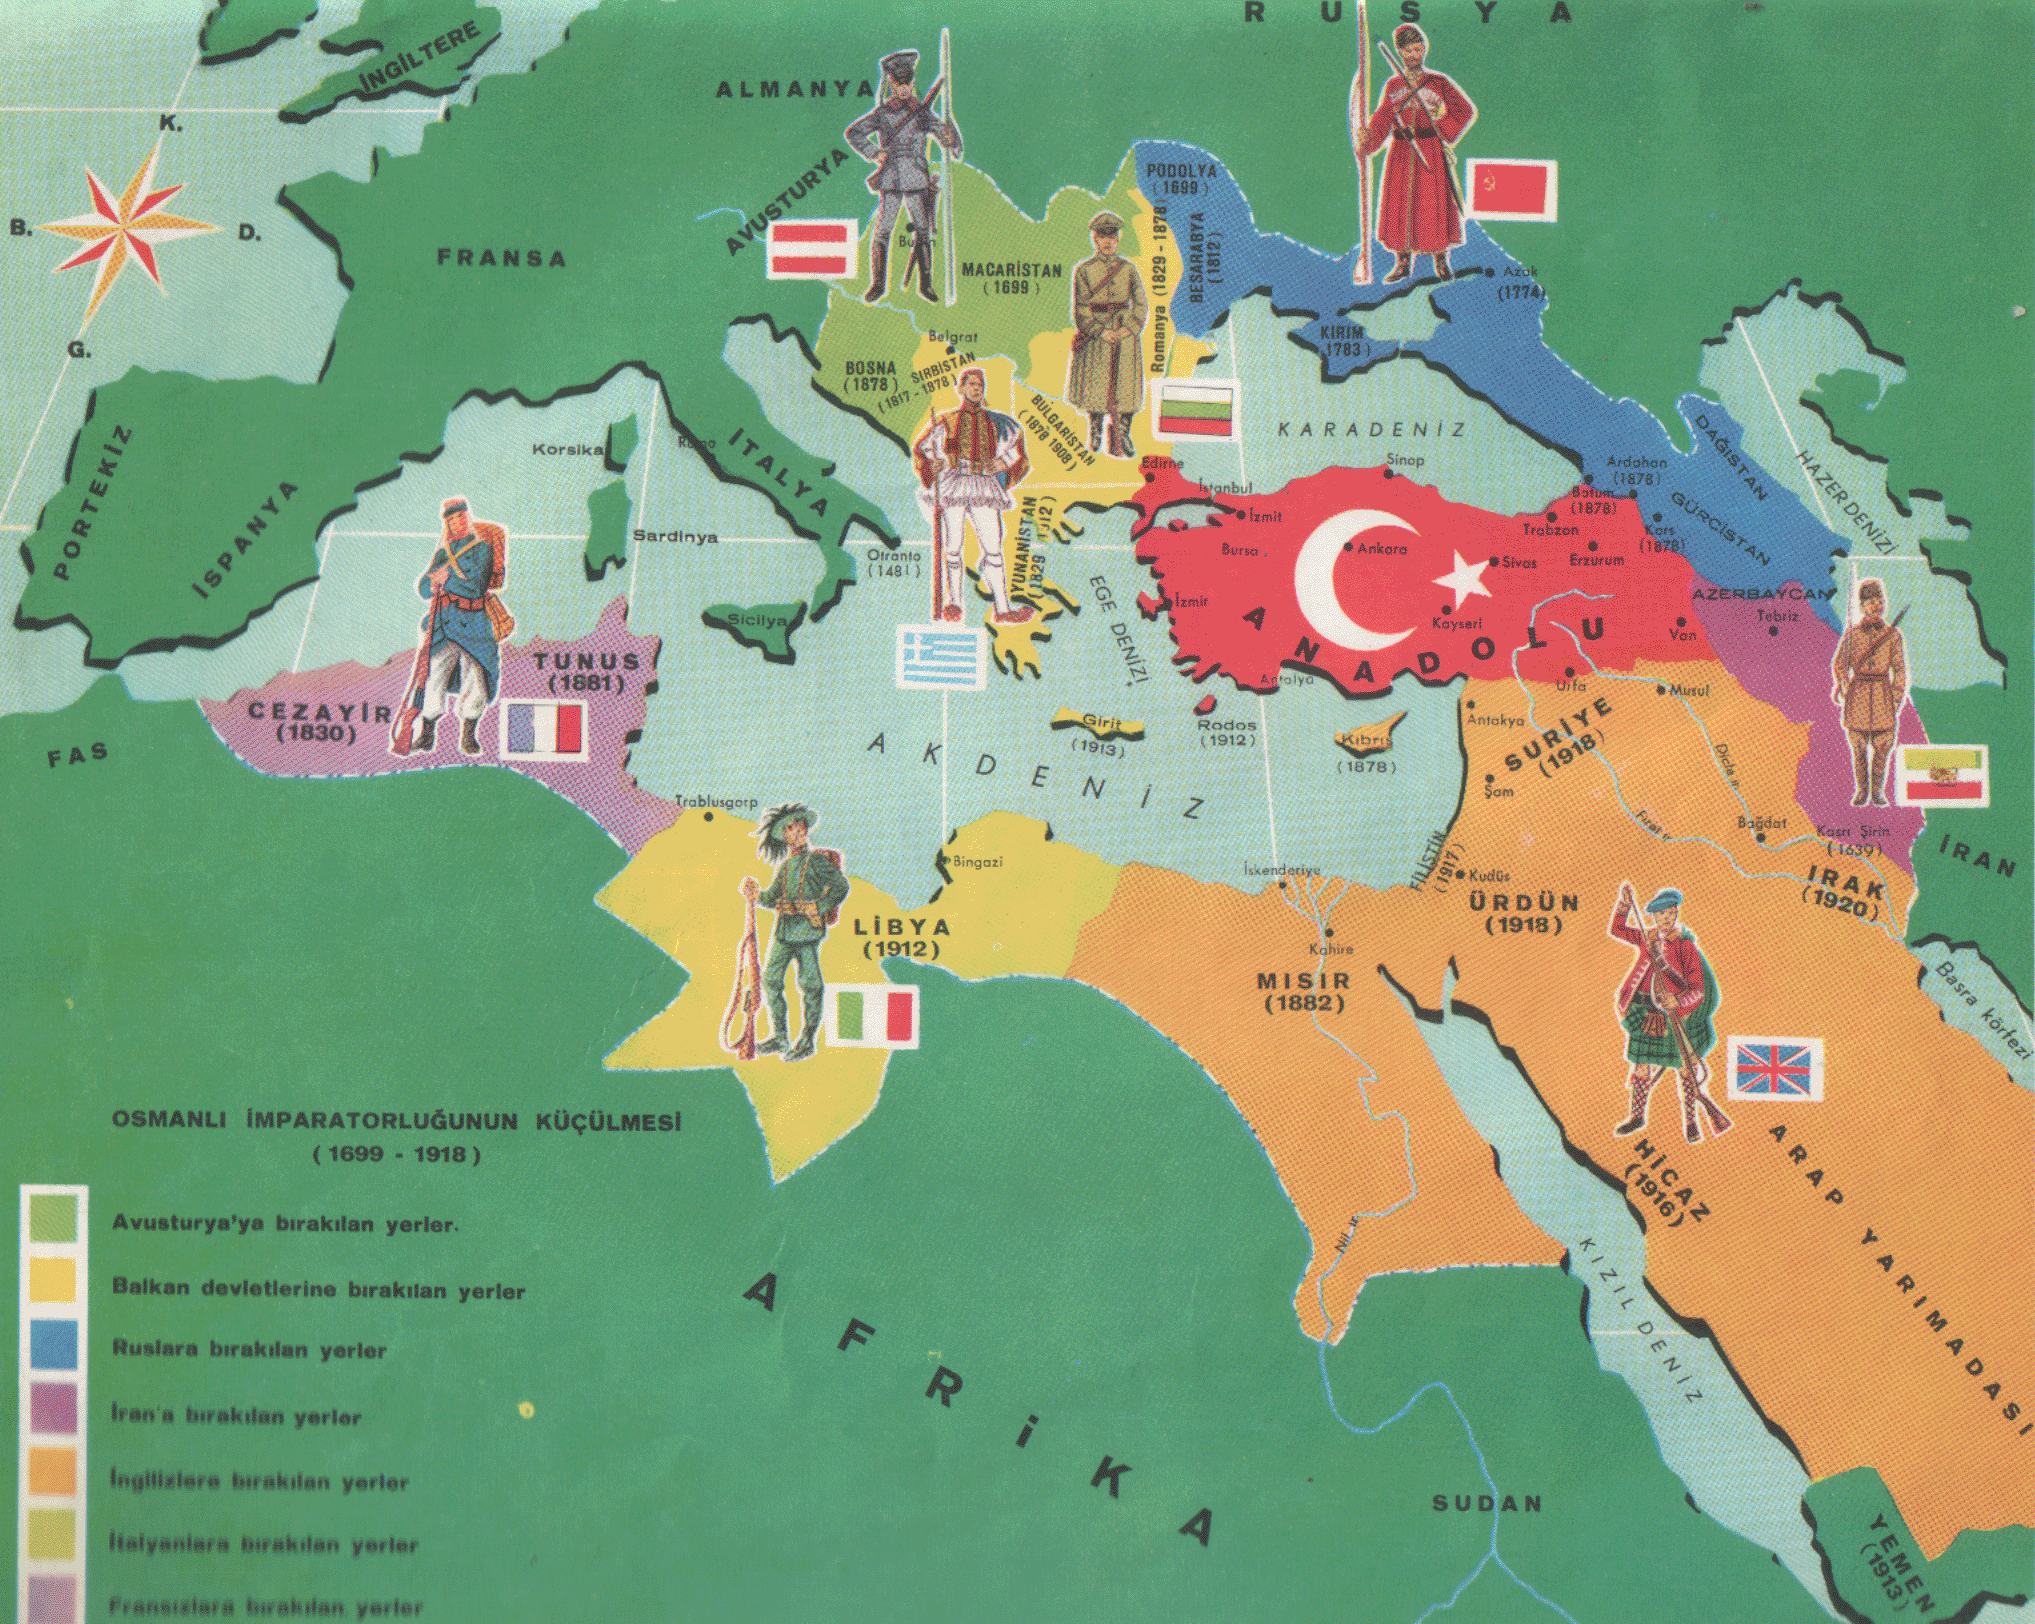 Ottoman Empire Map At Its Height, Over Time Istanbul Clues